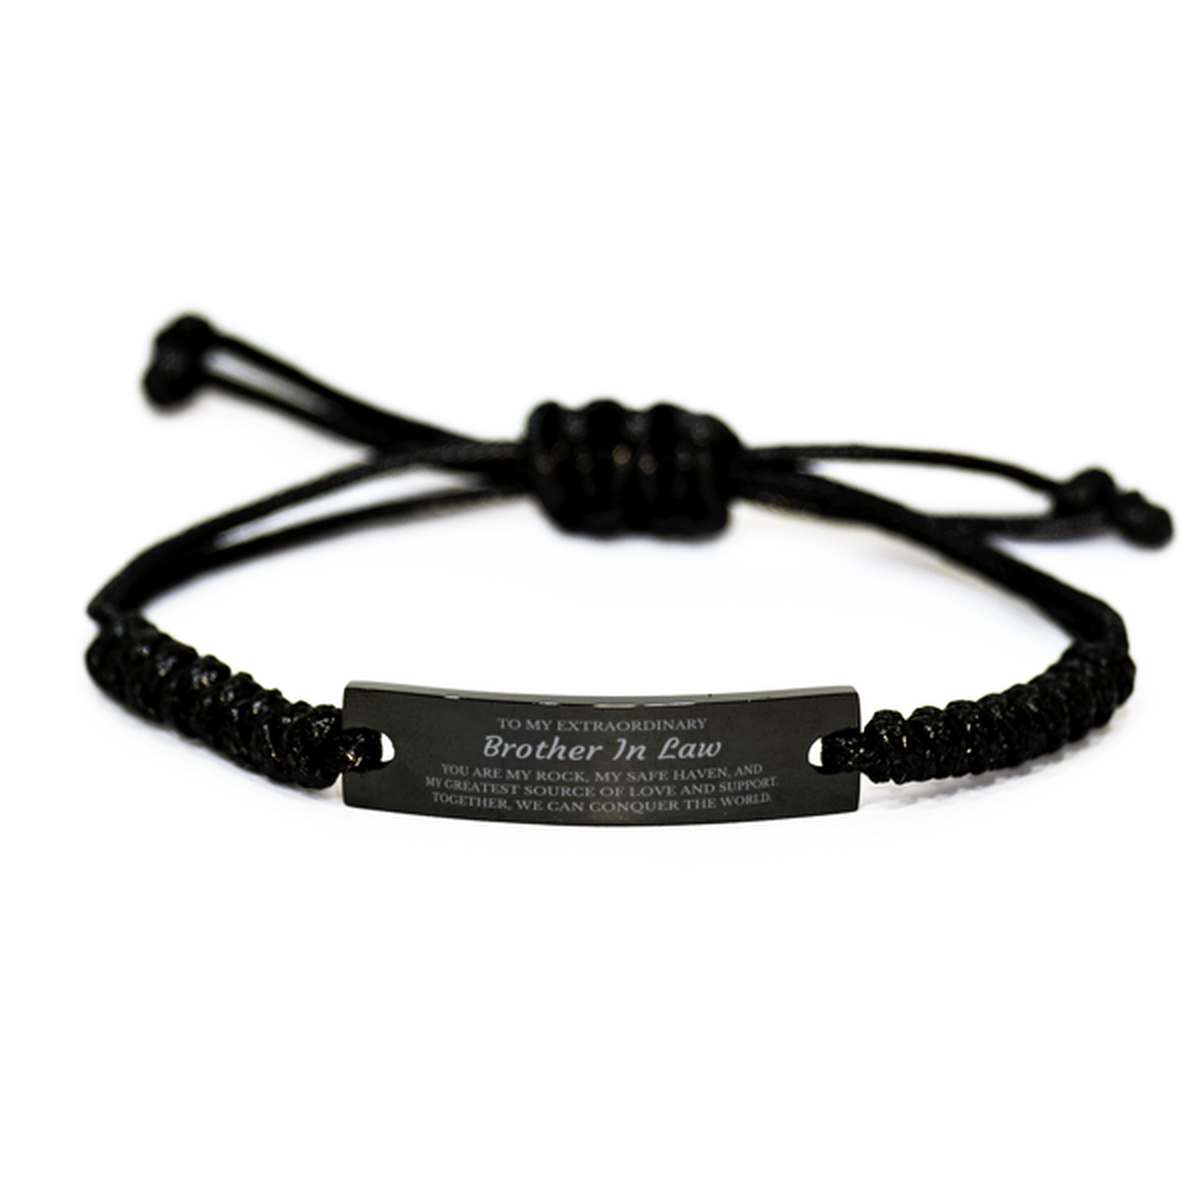 To My Extraordinary Brother In Law Gifts, Together, we can conquer the world, Birthday Black Rope Bracelet For Brother In Law, Christmas Gifts For Brother In Law